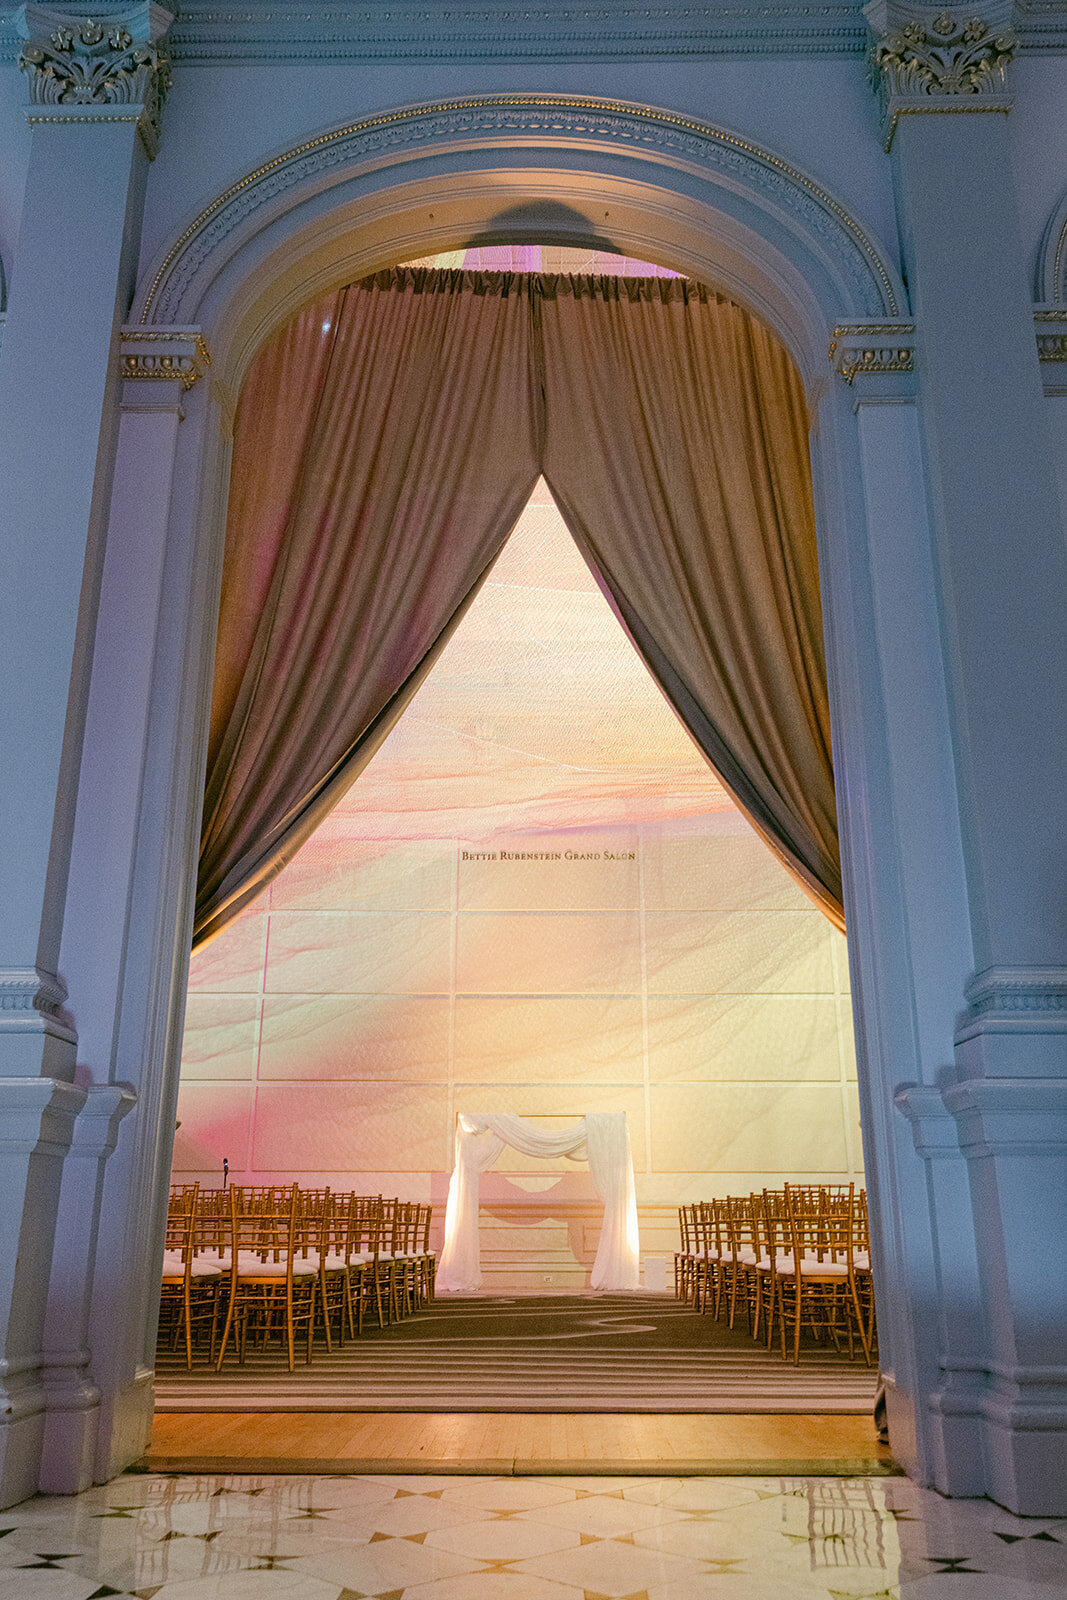 agriffin-events-renwick-gallery-smithsonian-dc-wedding-planner-46